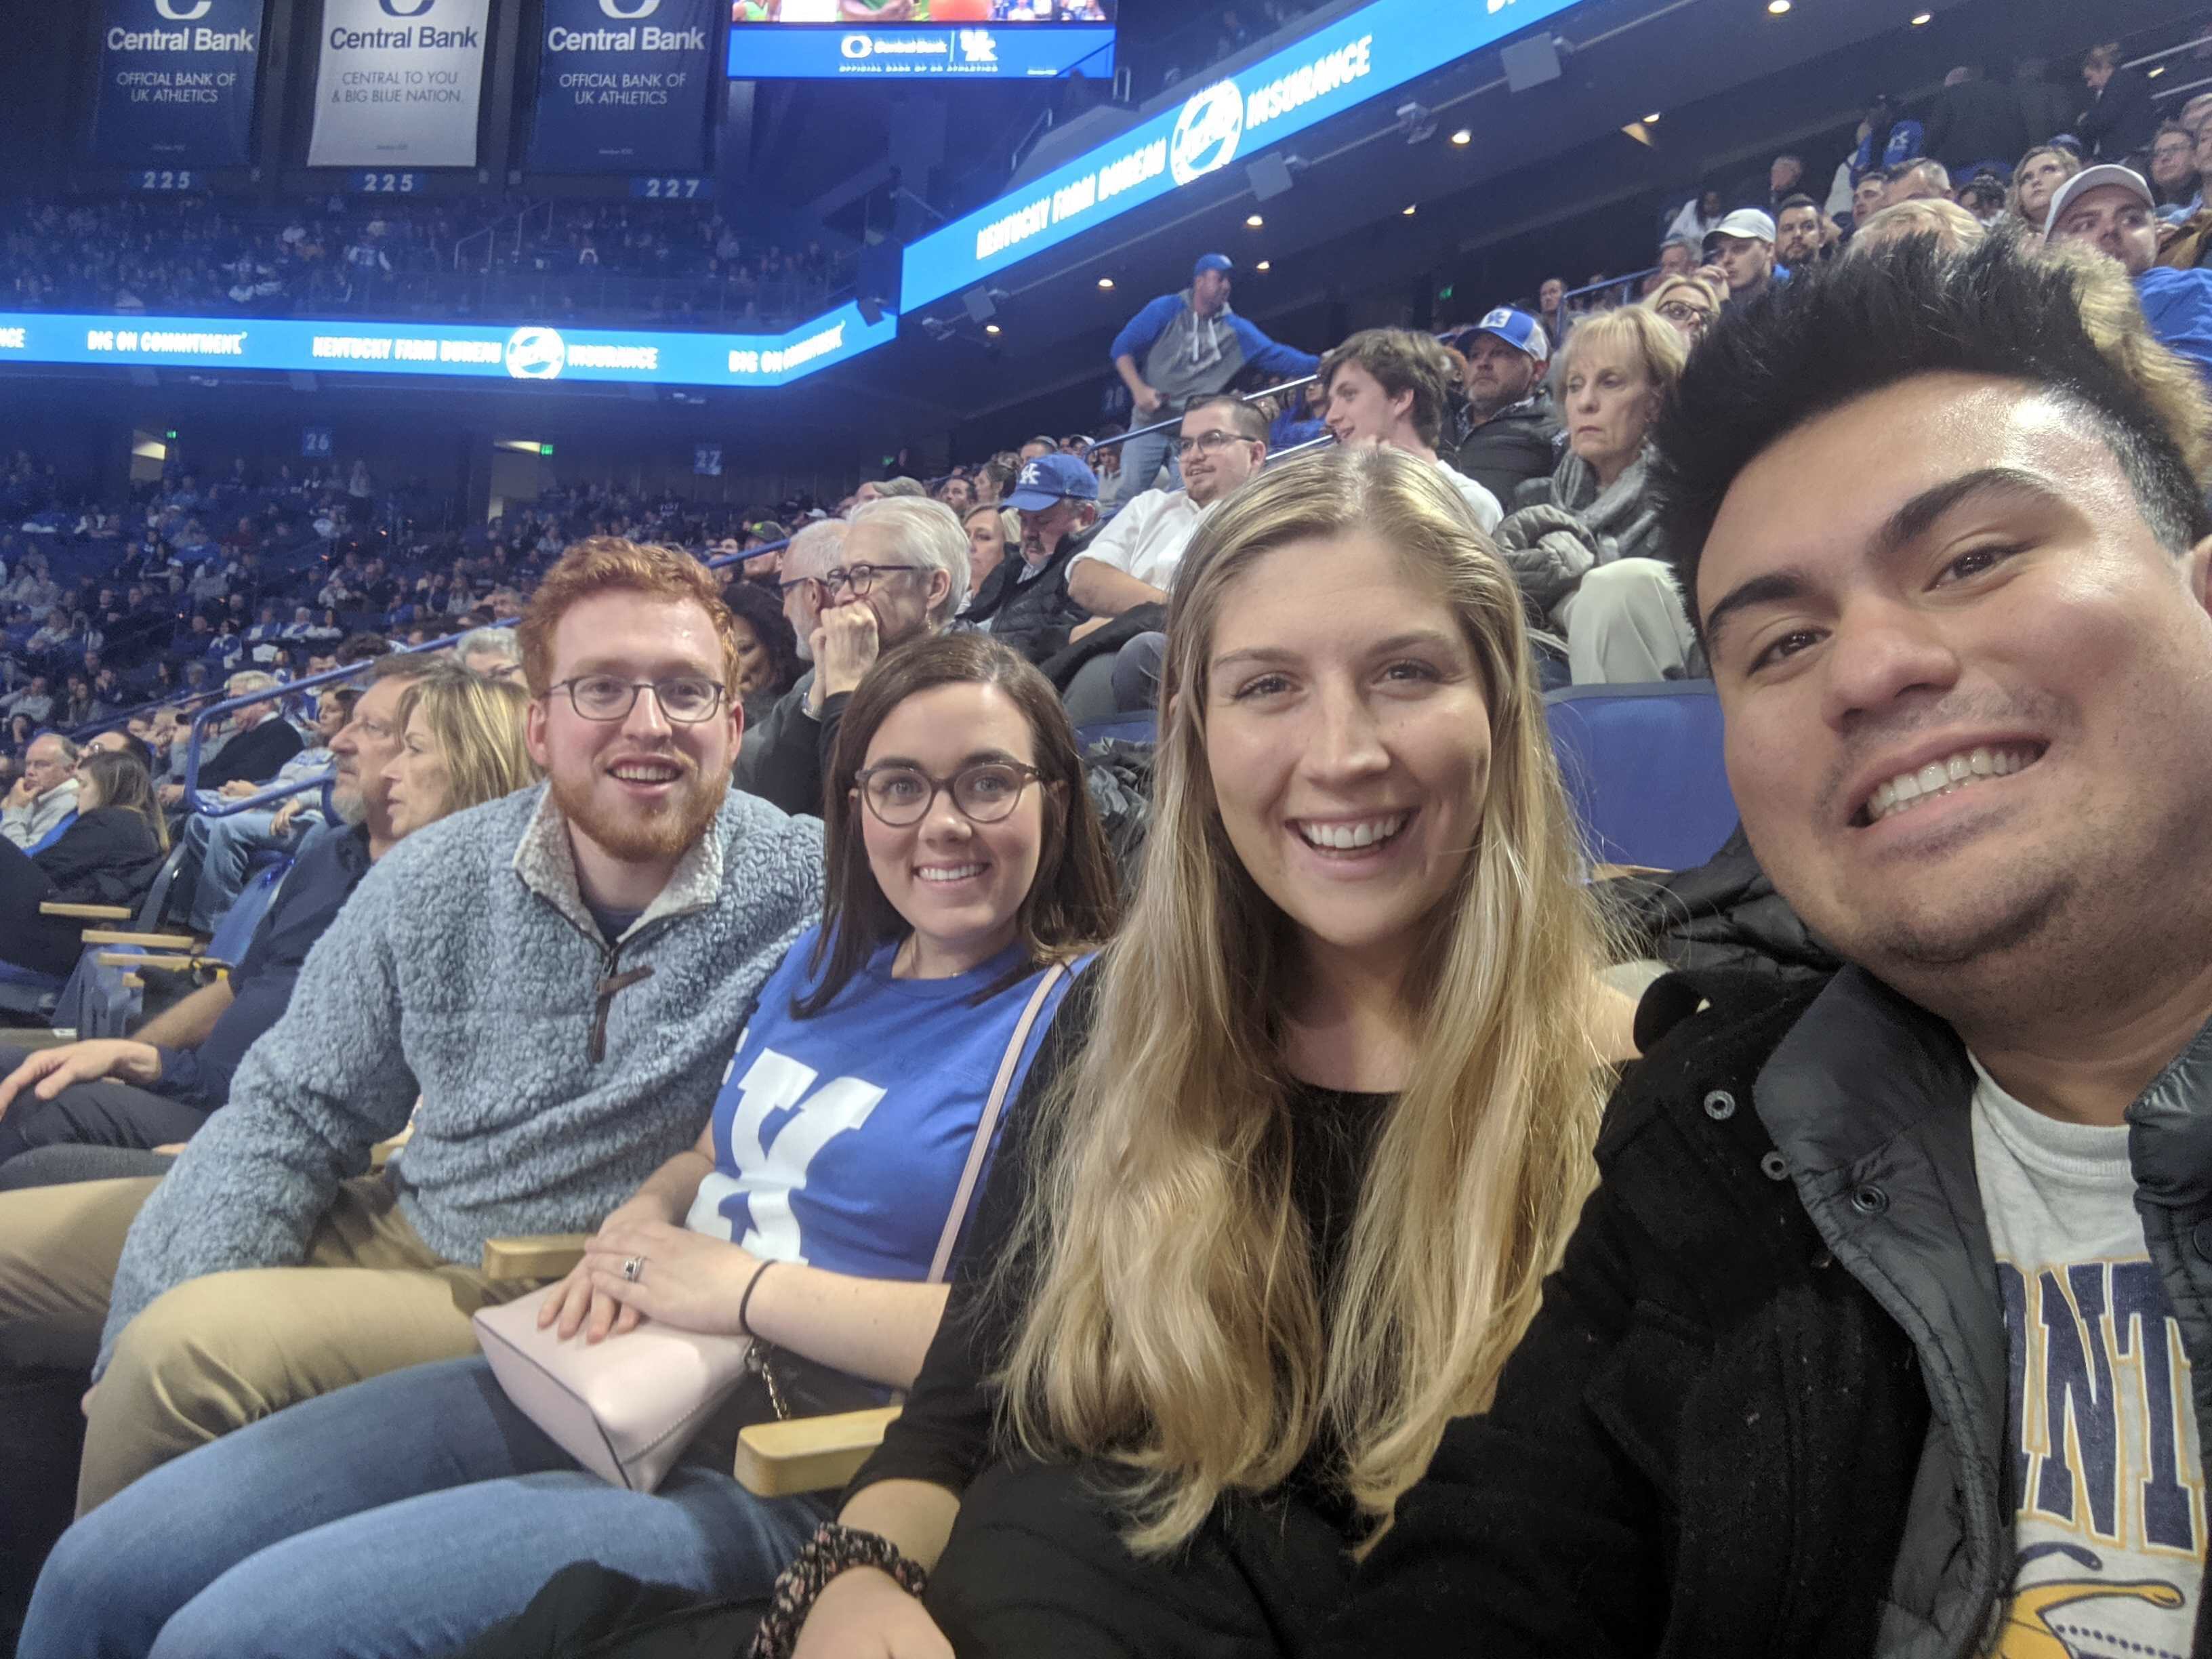 Group selfie at the UK game